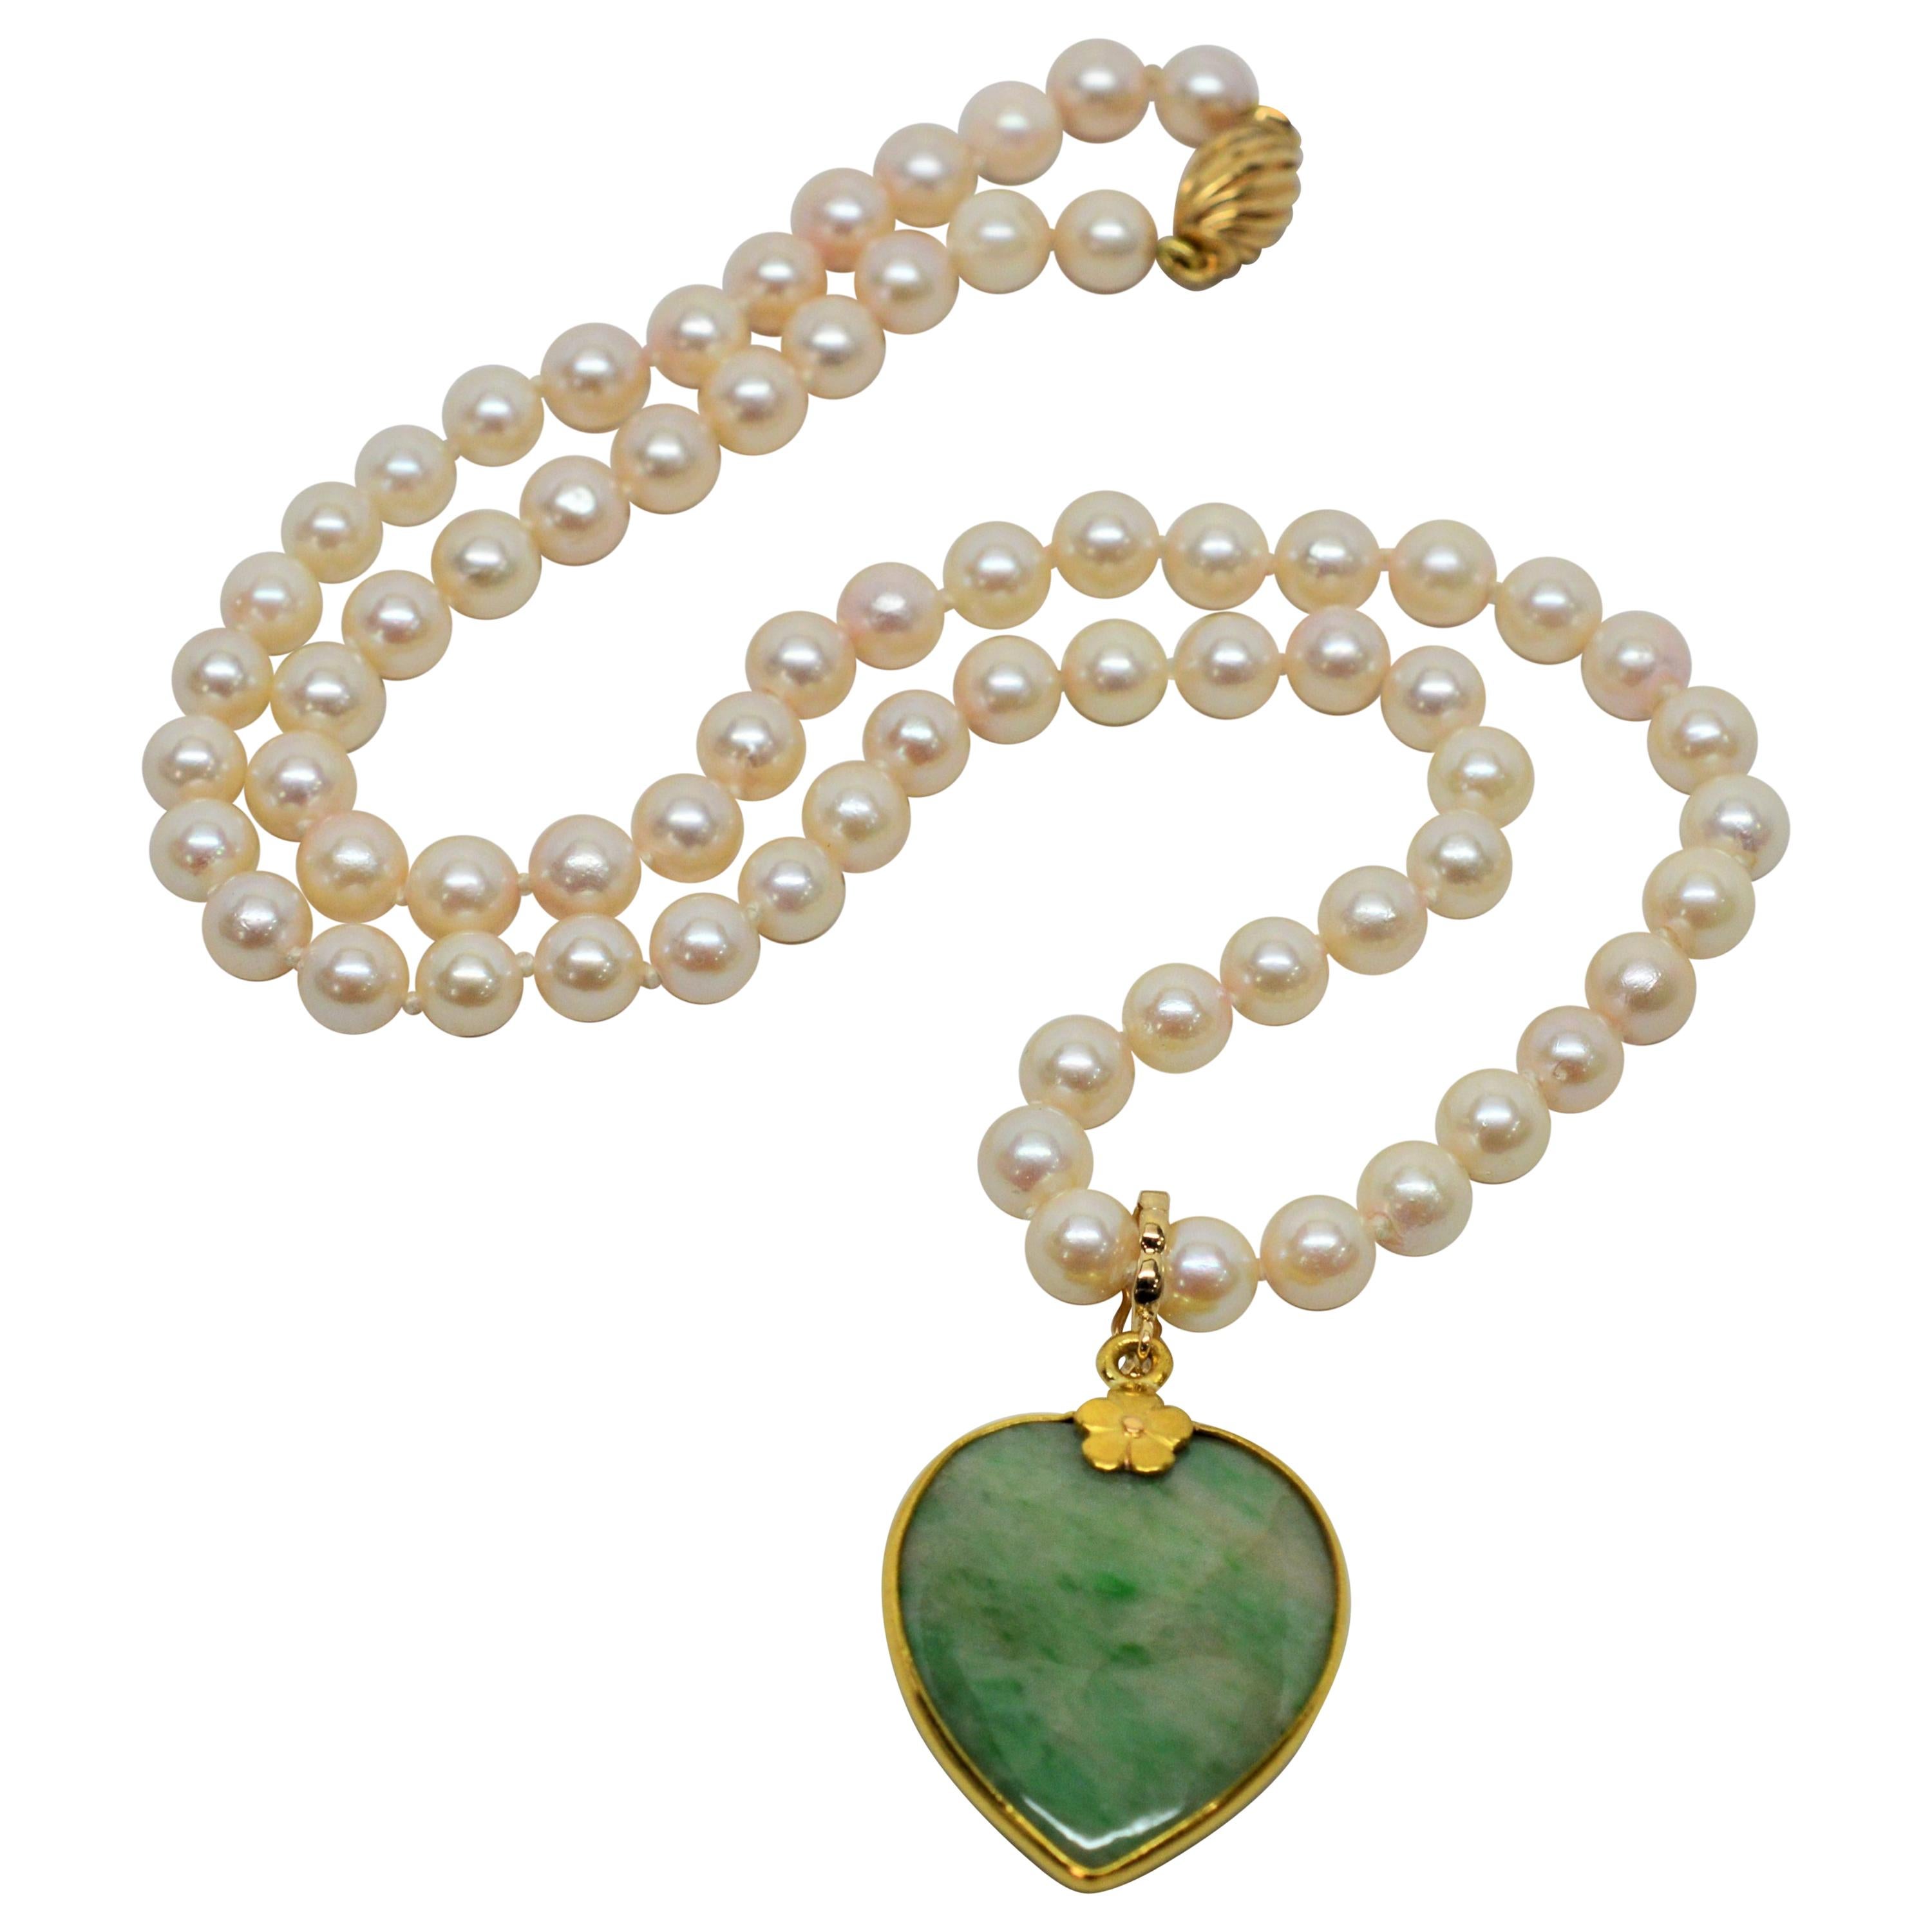 Antique Jade Yellow Gold Heart Pendant on Pearl Necklace